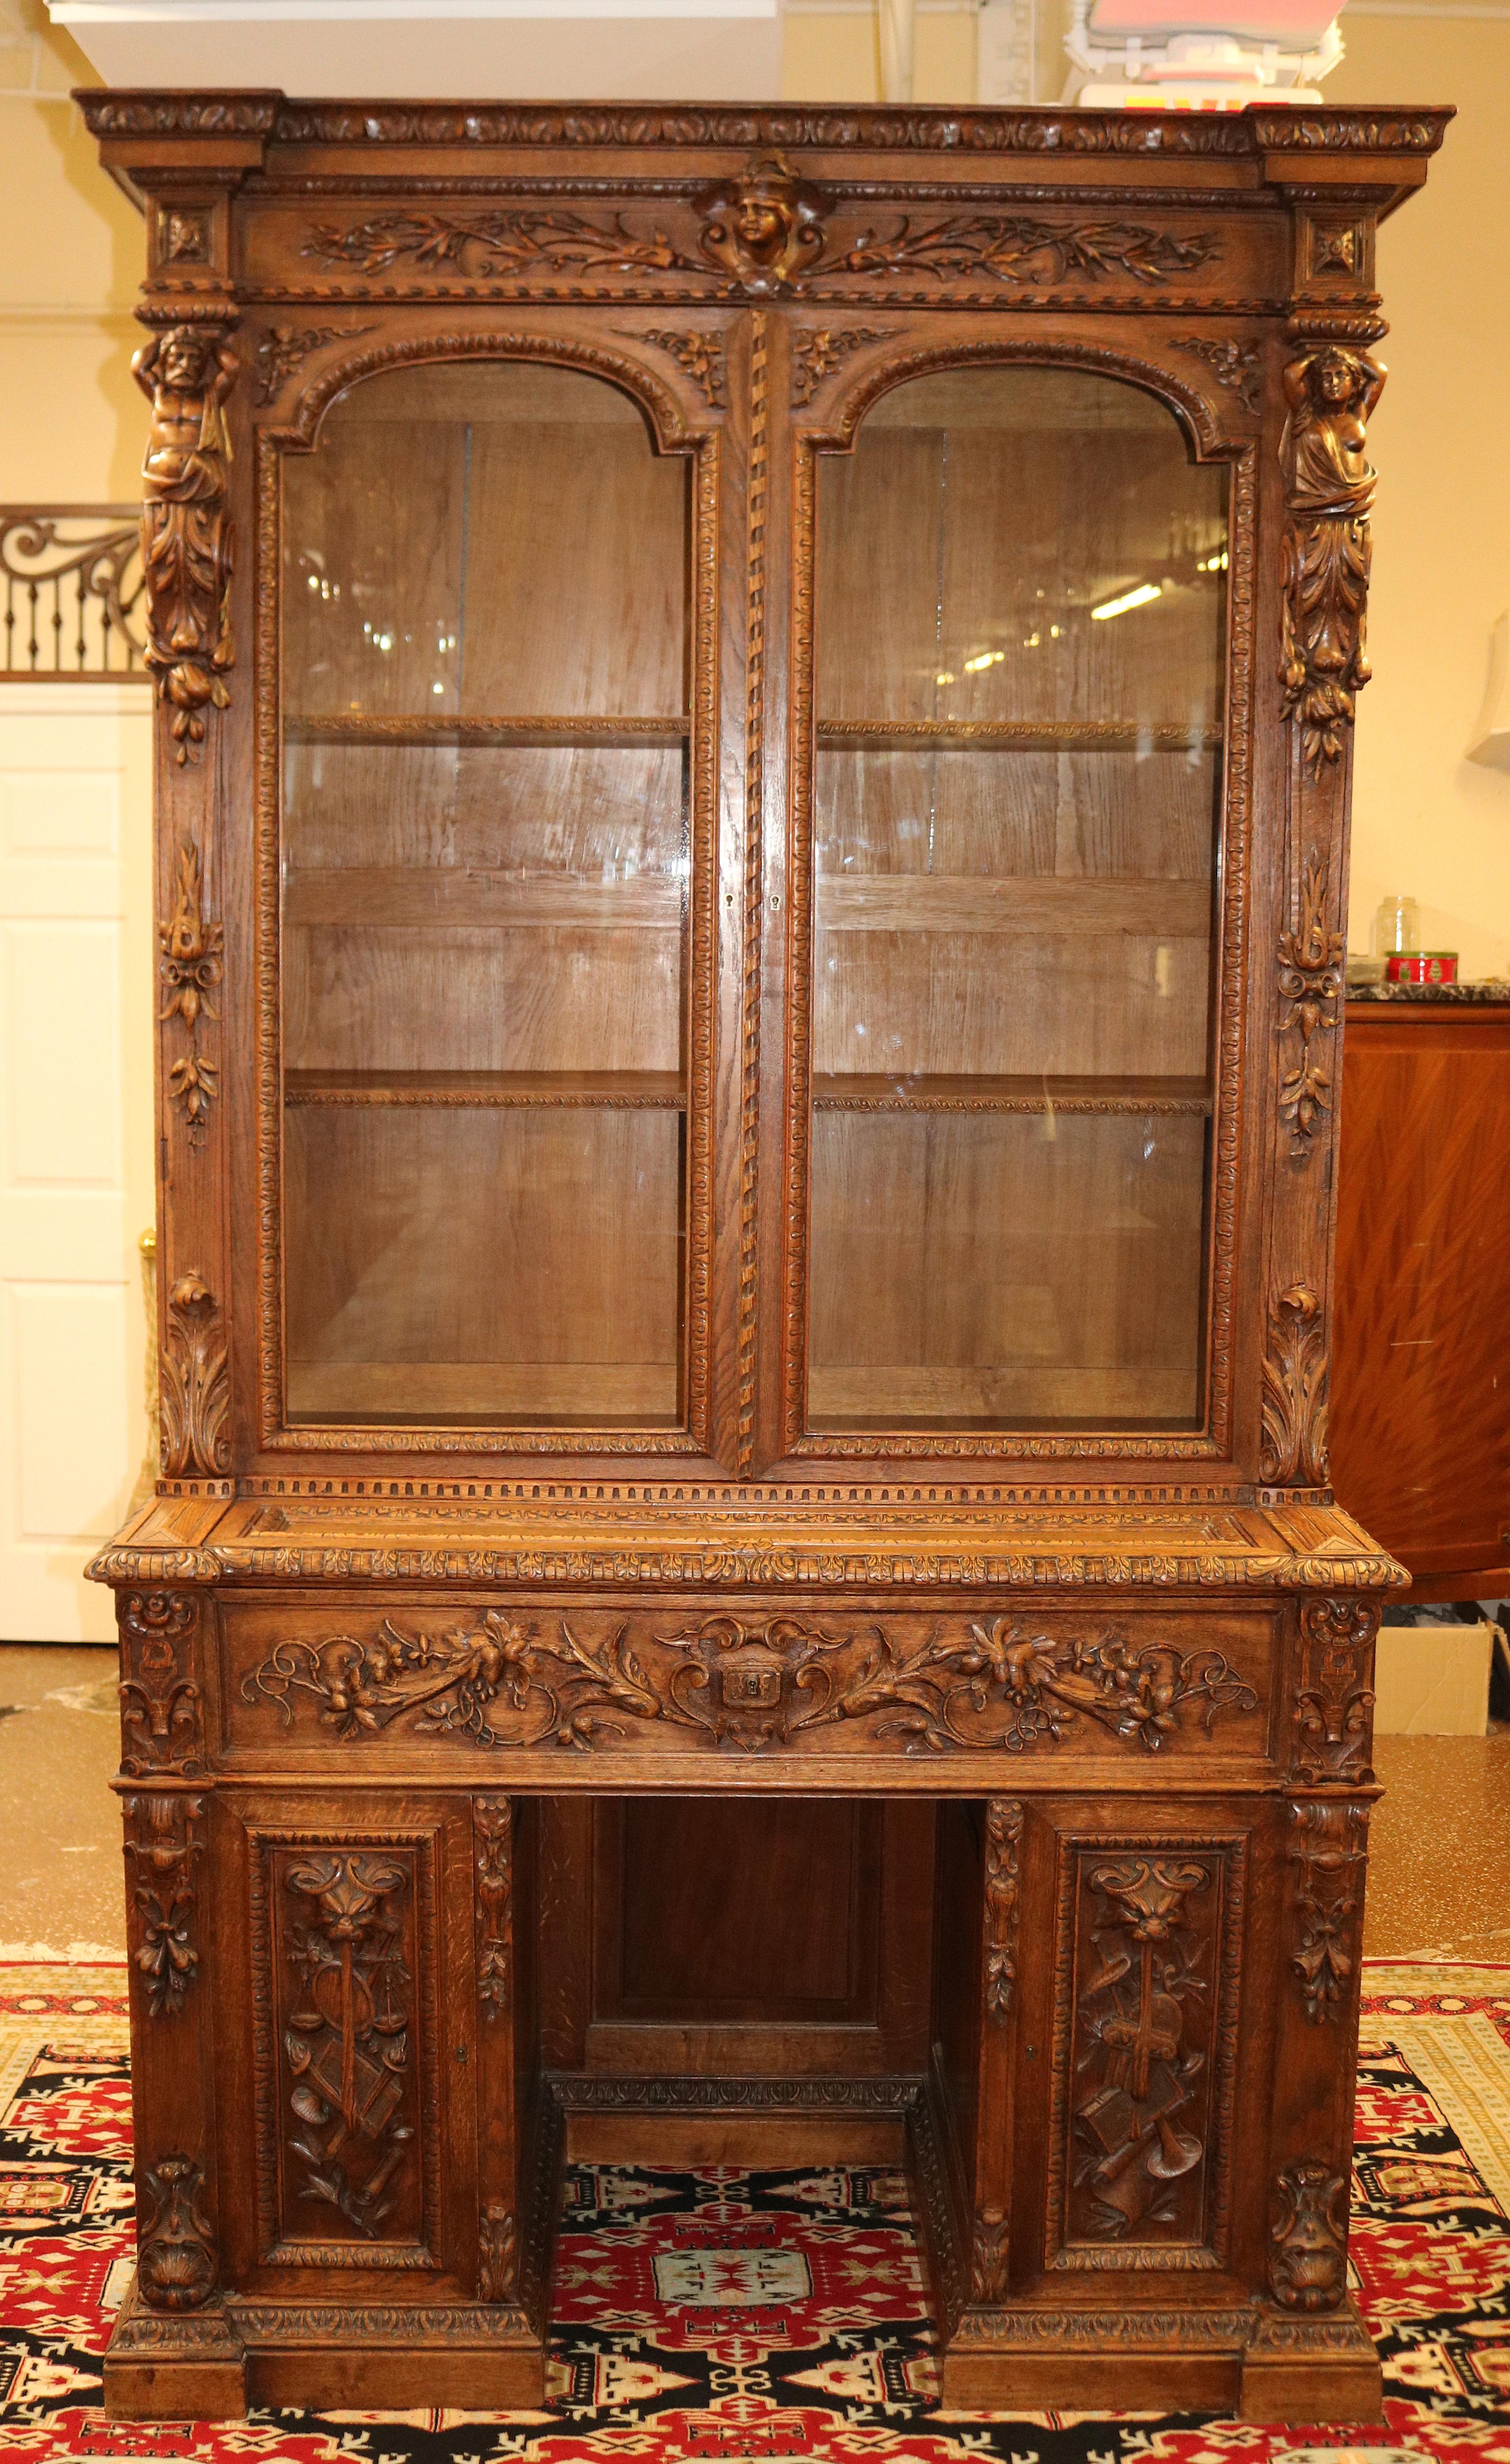 ​19th Century Oak Renaissance Revival Figural Secretary Desk Cabinet

Dimensions : 98 Tall X 56 Wide X 26 Deep

This secretary desk was made in France in the late 19th century. The carvings are magnificent and the oak grain is killer! The figures